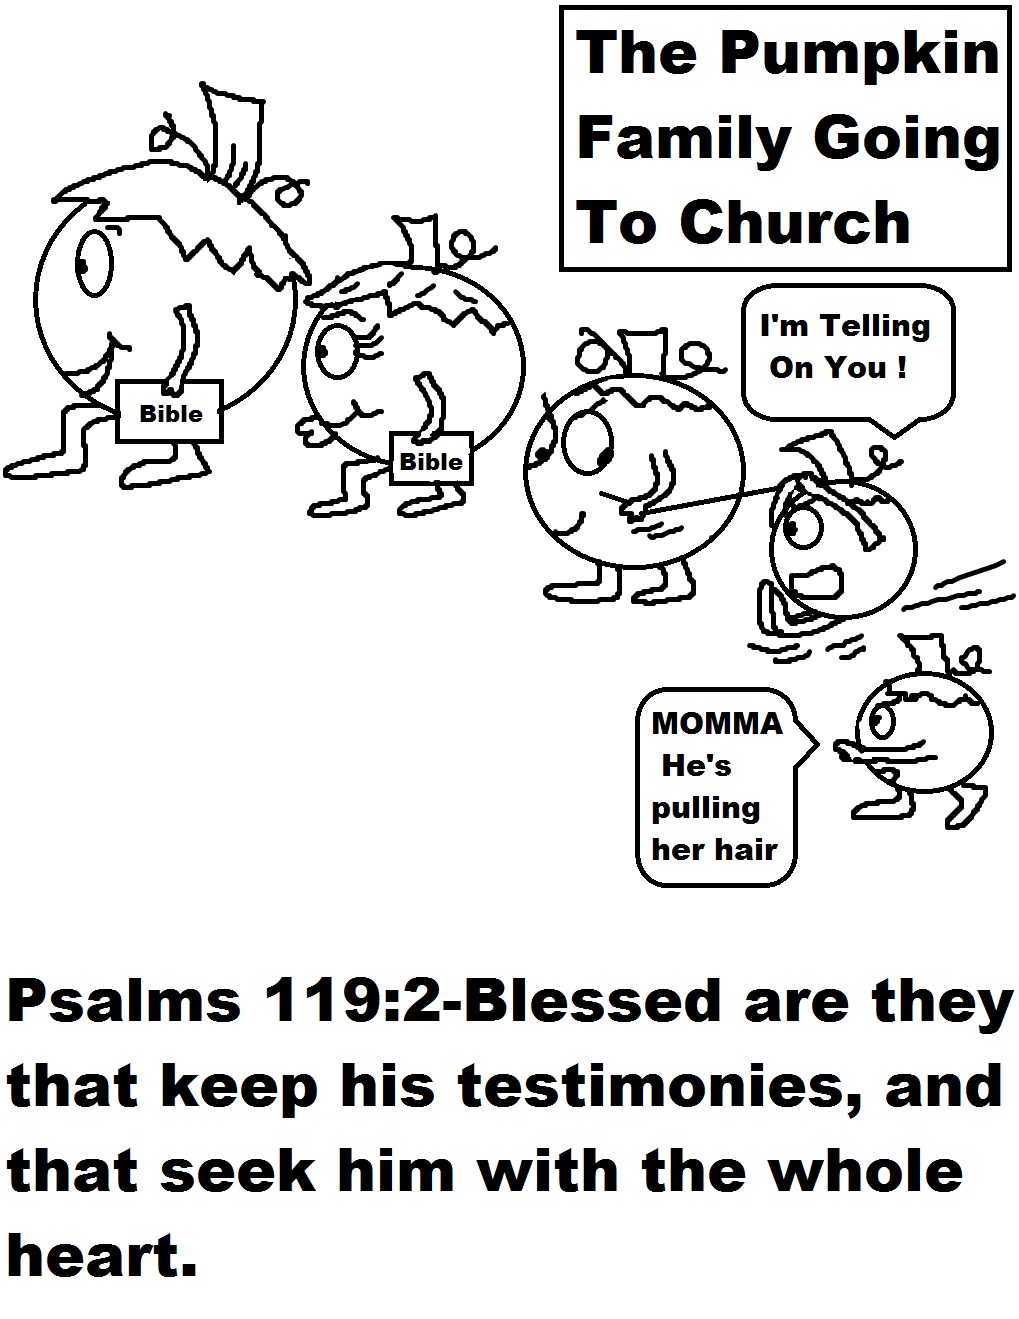 clipart family going to church - photo #28